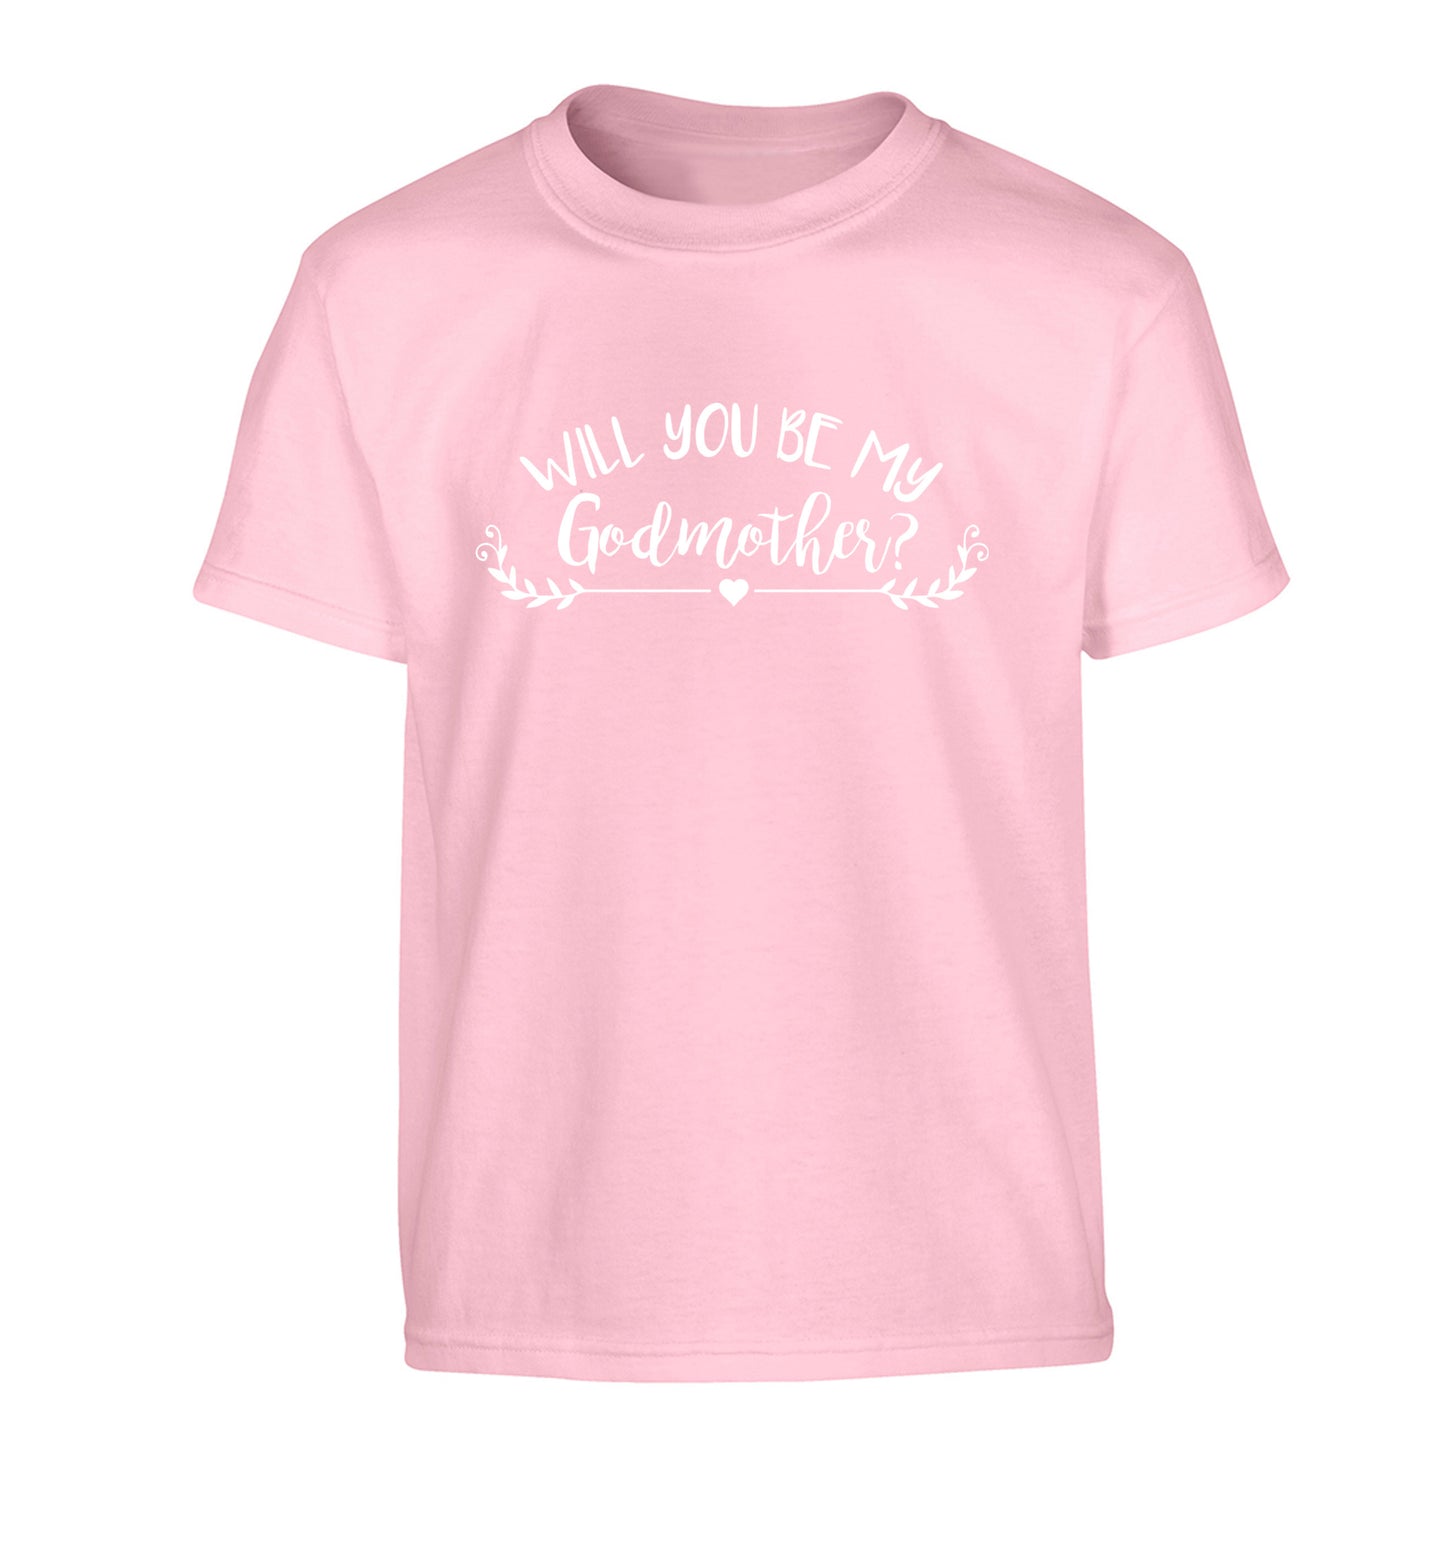 Will you be my godmother? Children's light pink Tshirt 12-14 Years